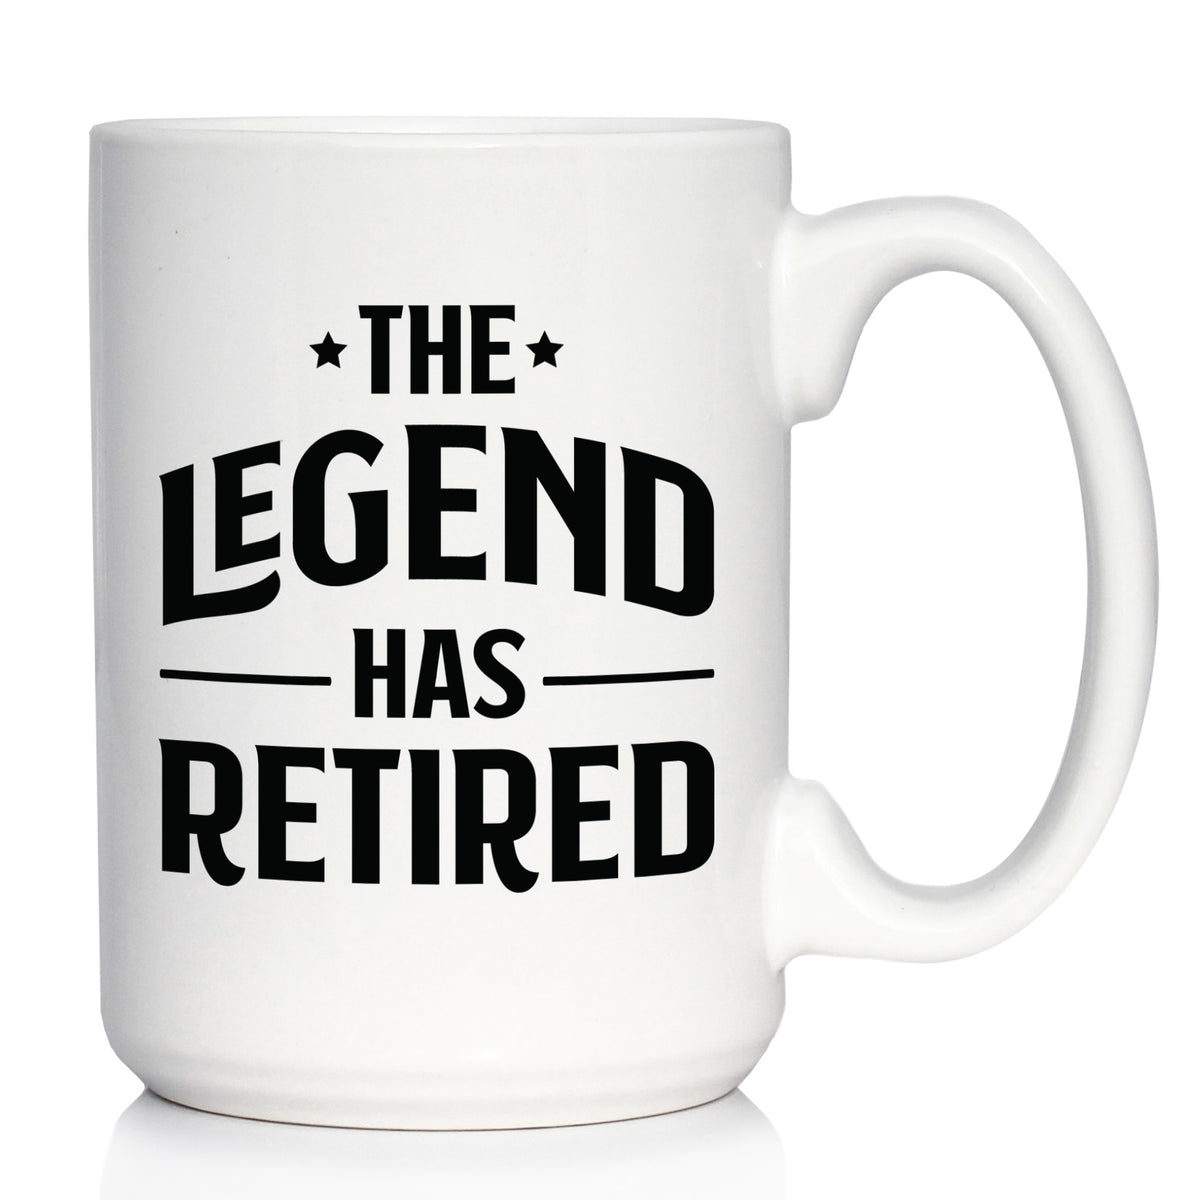 The Legend Has Retired - Funny Coffee Mug Retirement Gift for Boss or Coworkers - Large 15 Oz Ceramic Coffee Cup…